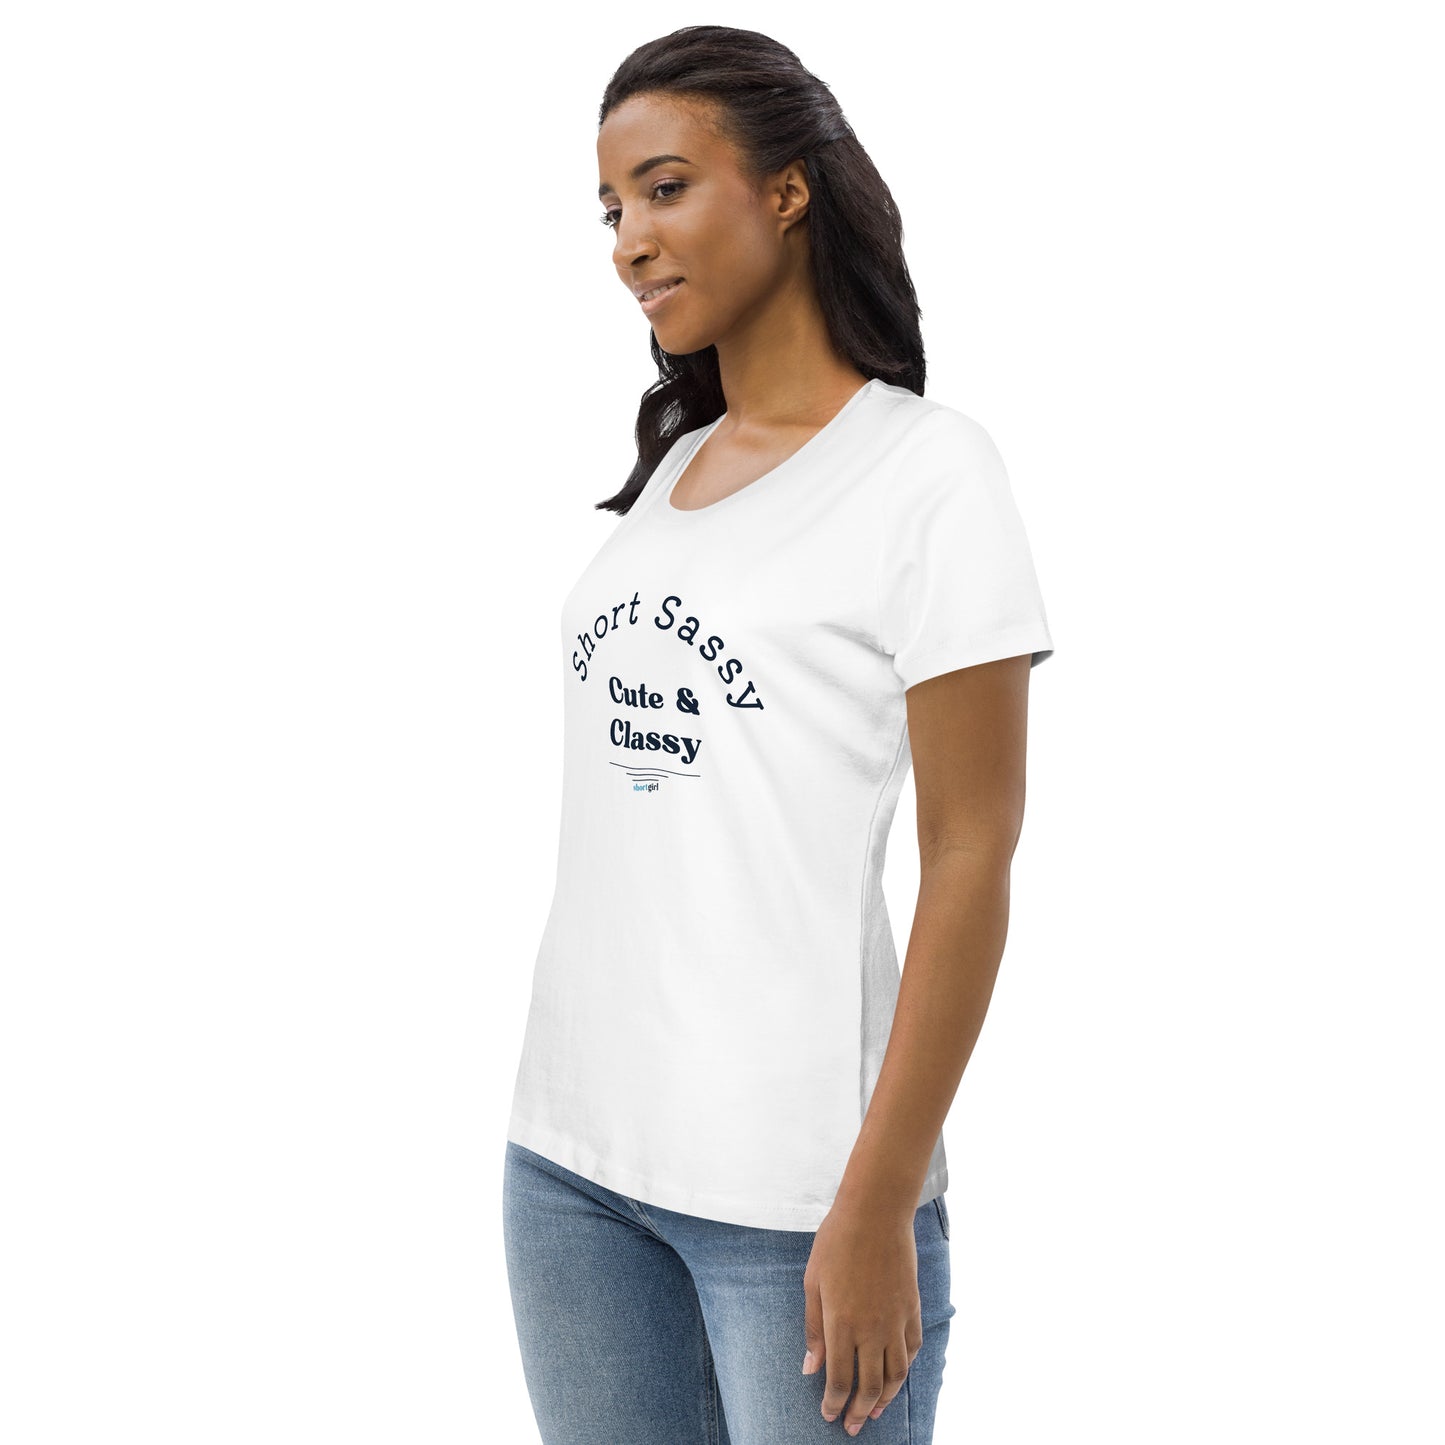 Women's fitted eco tee - Short, Sassy, Cute & Classy